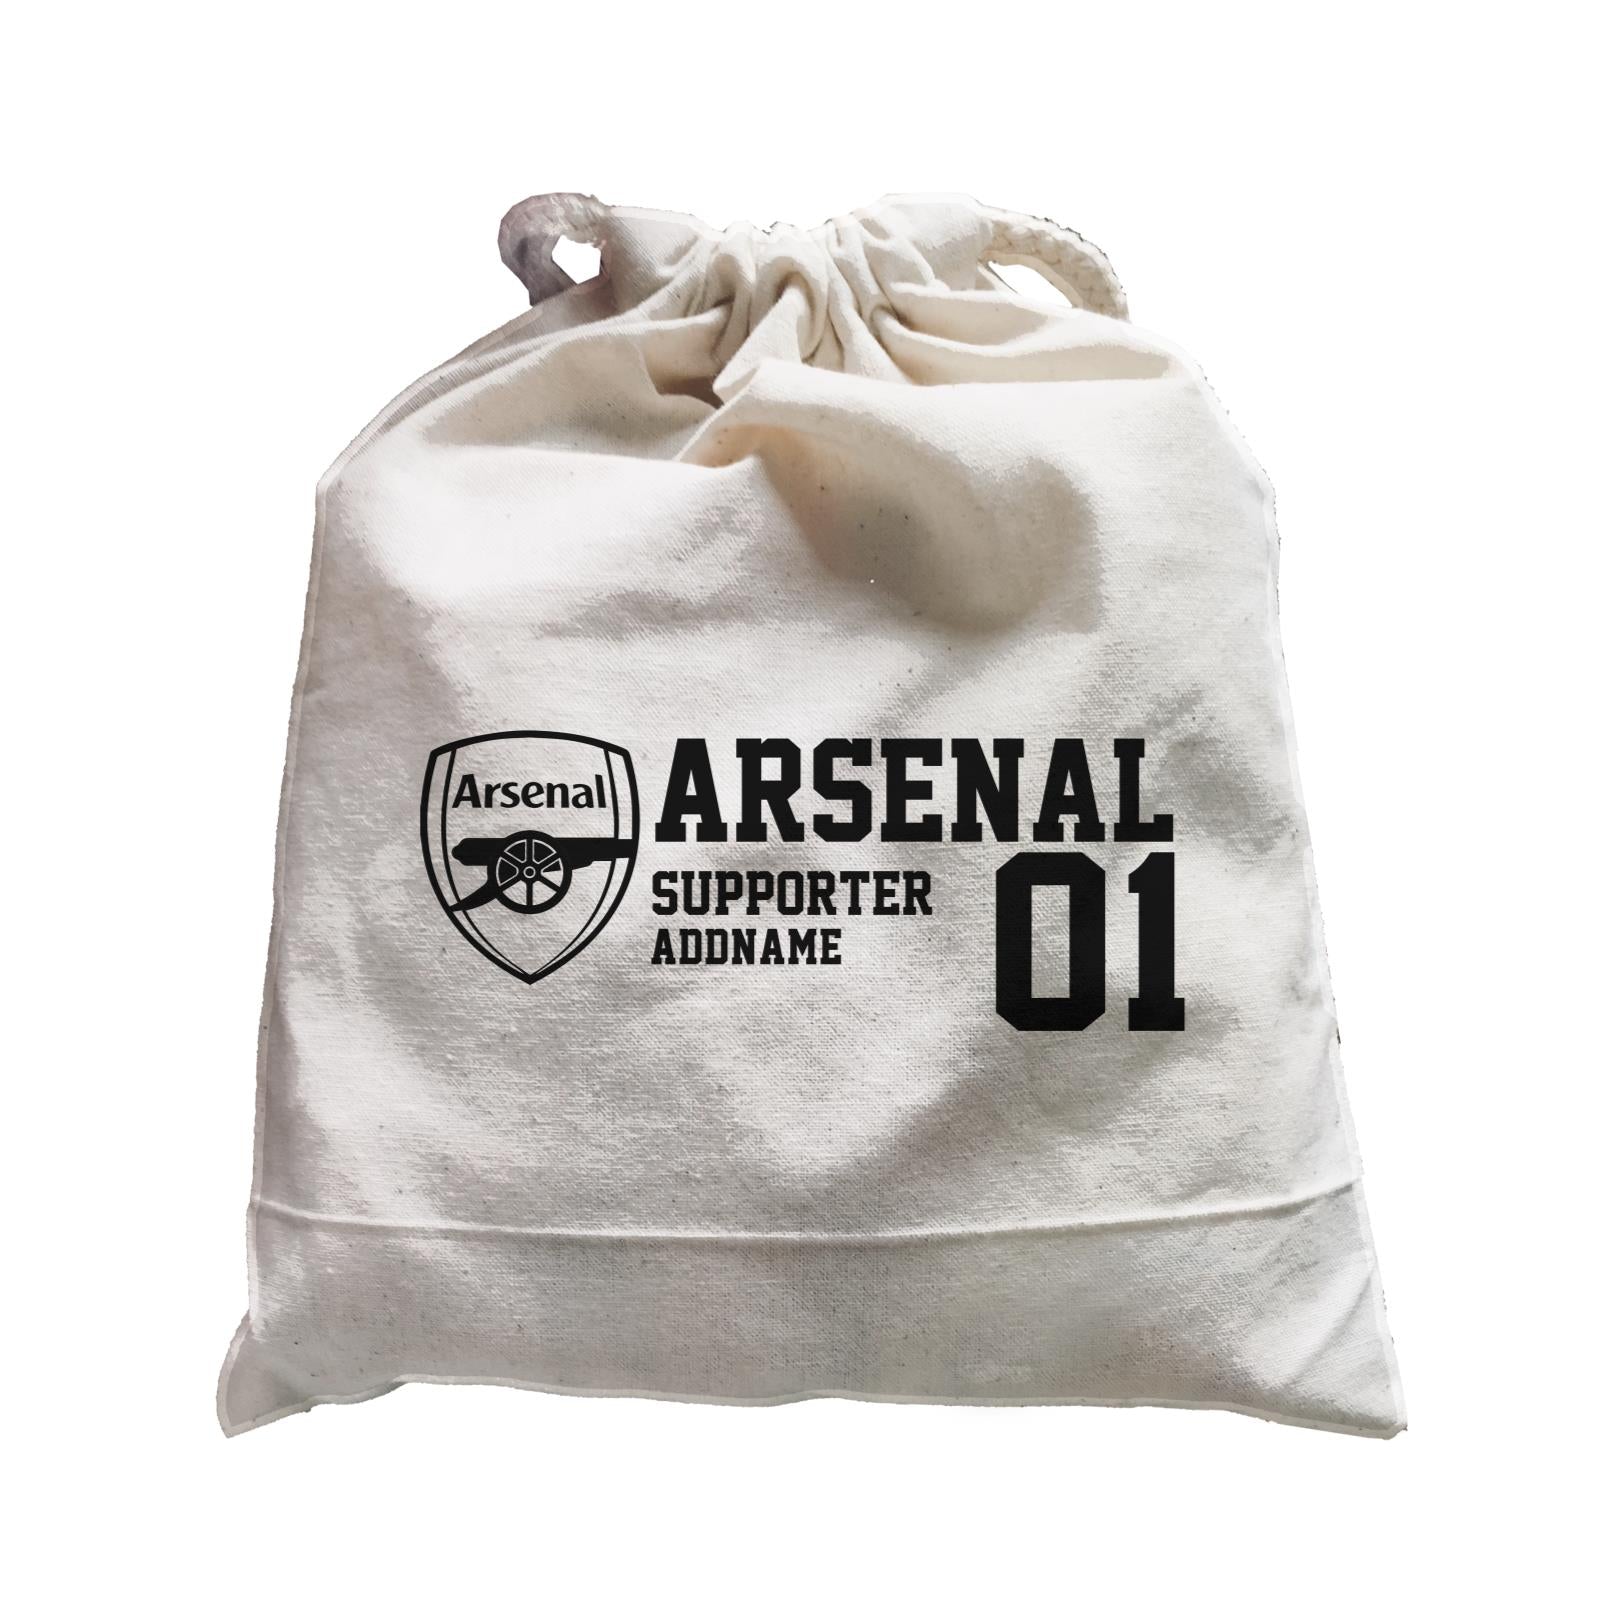 Arsenal Football Logo Supporter Accessories Addname Satchel